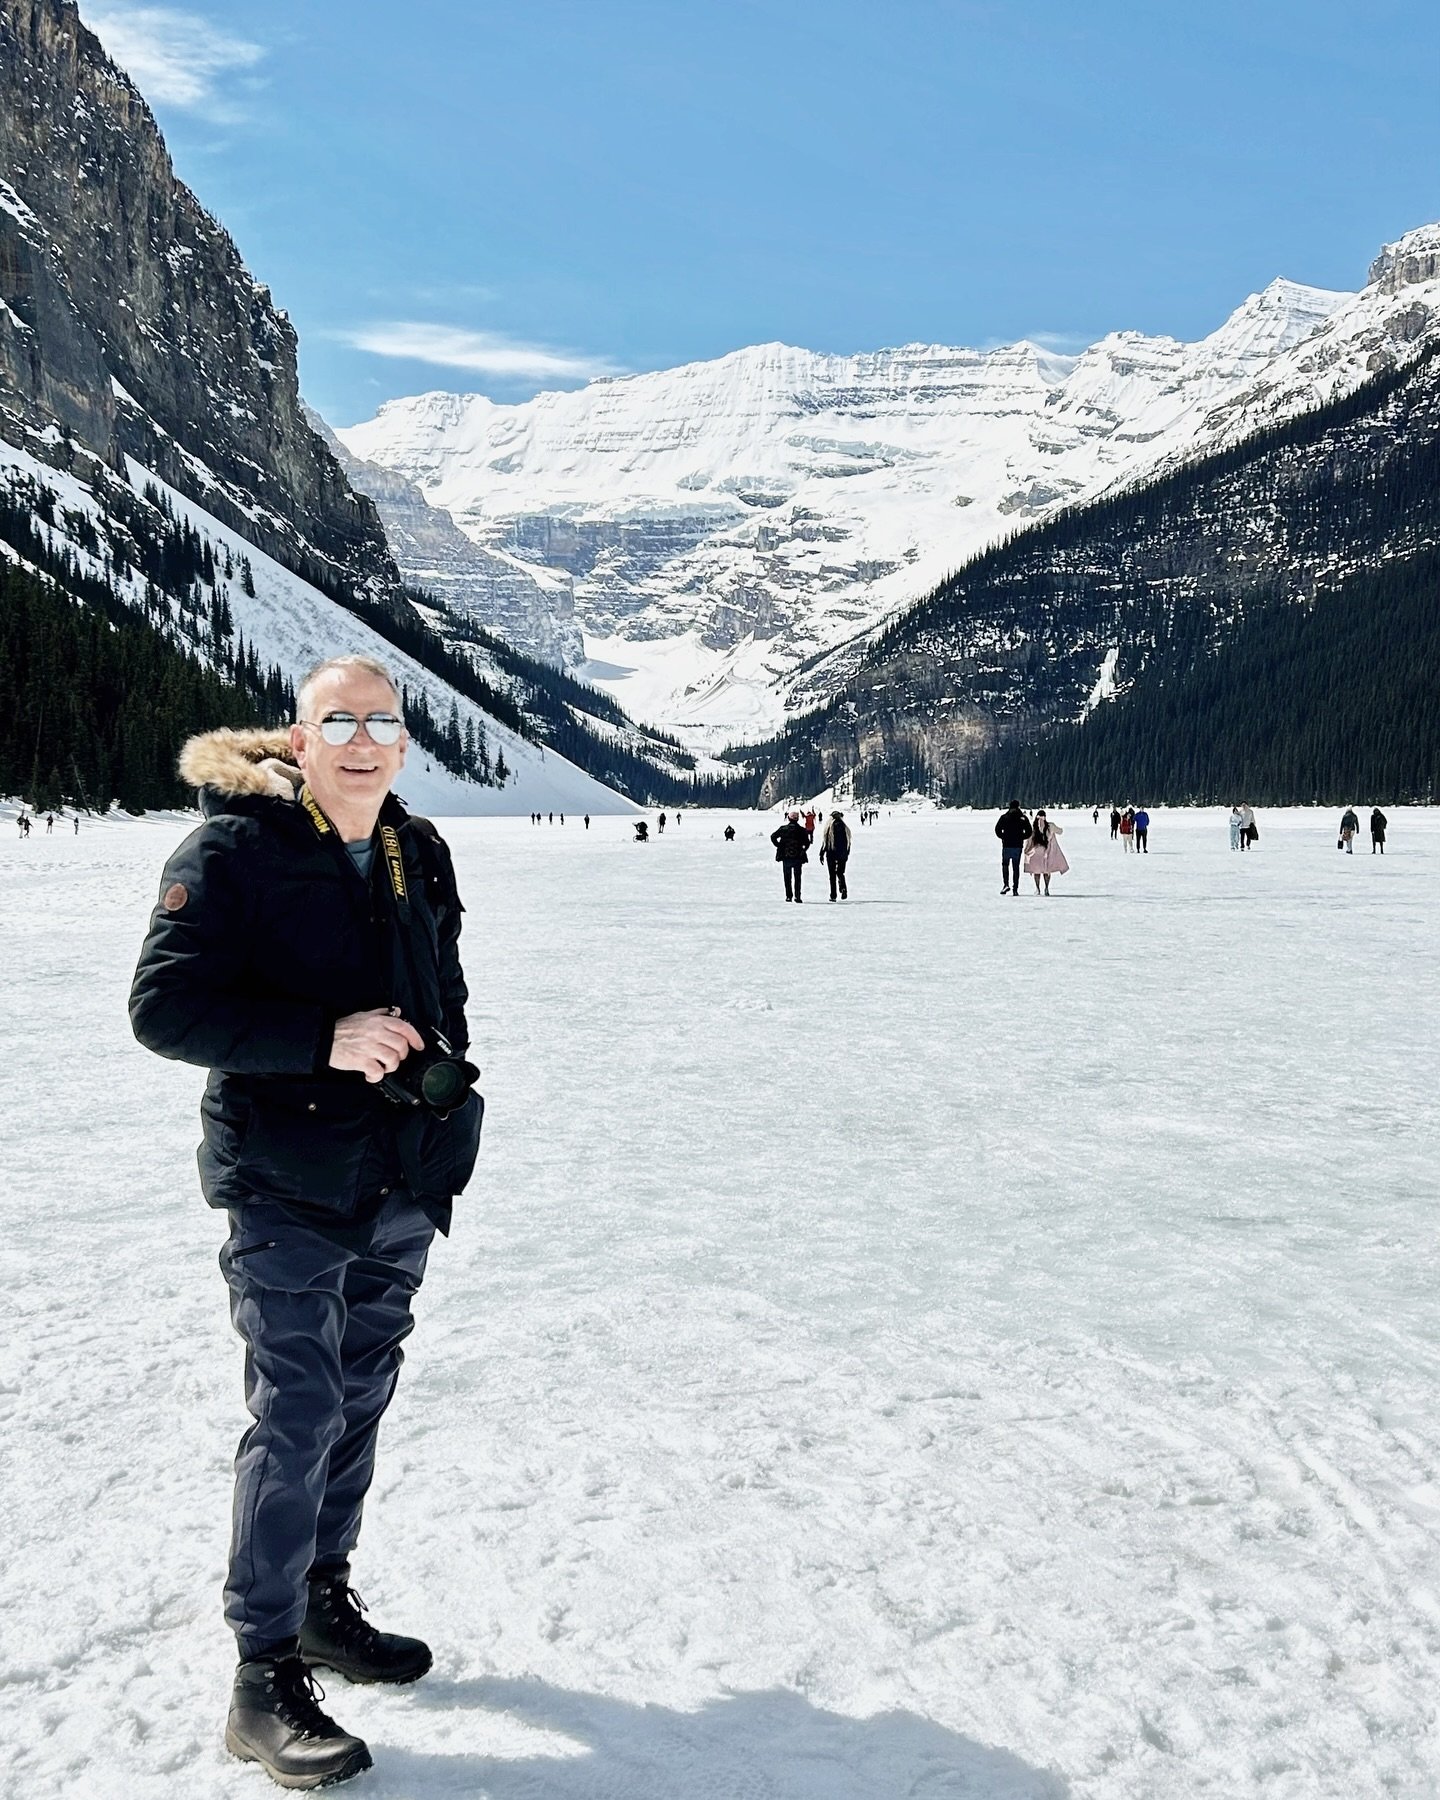 Lake Louise usually begins to freeze in November. The month of October usually brings heavy snowfall in the area, and the Lake Louise Ski Resort usually opens up the first week of November around the same time the lake freezes.

Generally it thaws in